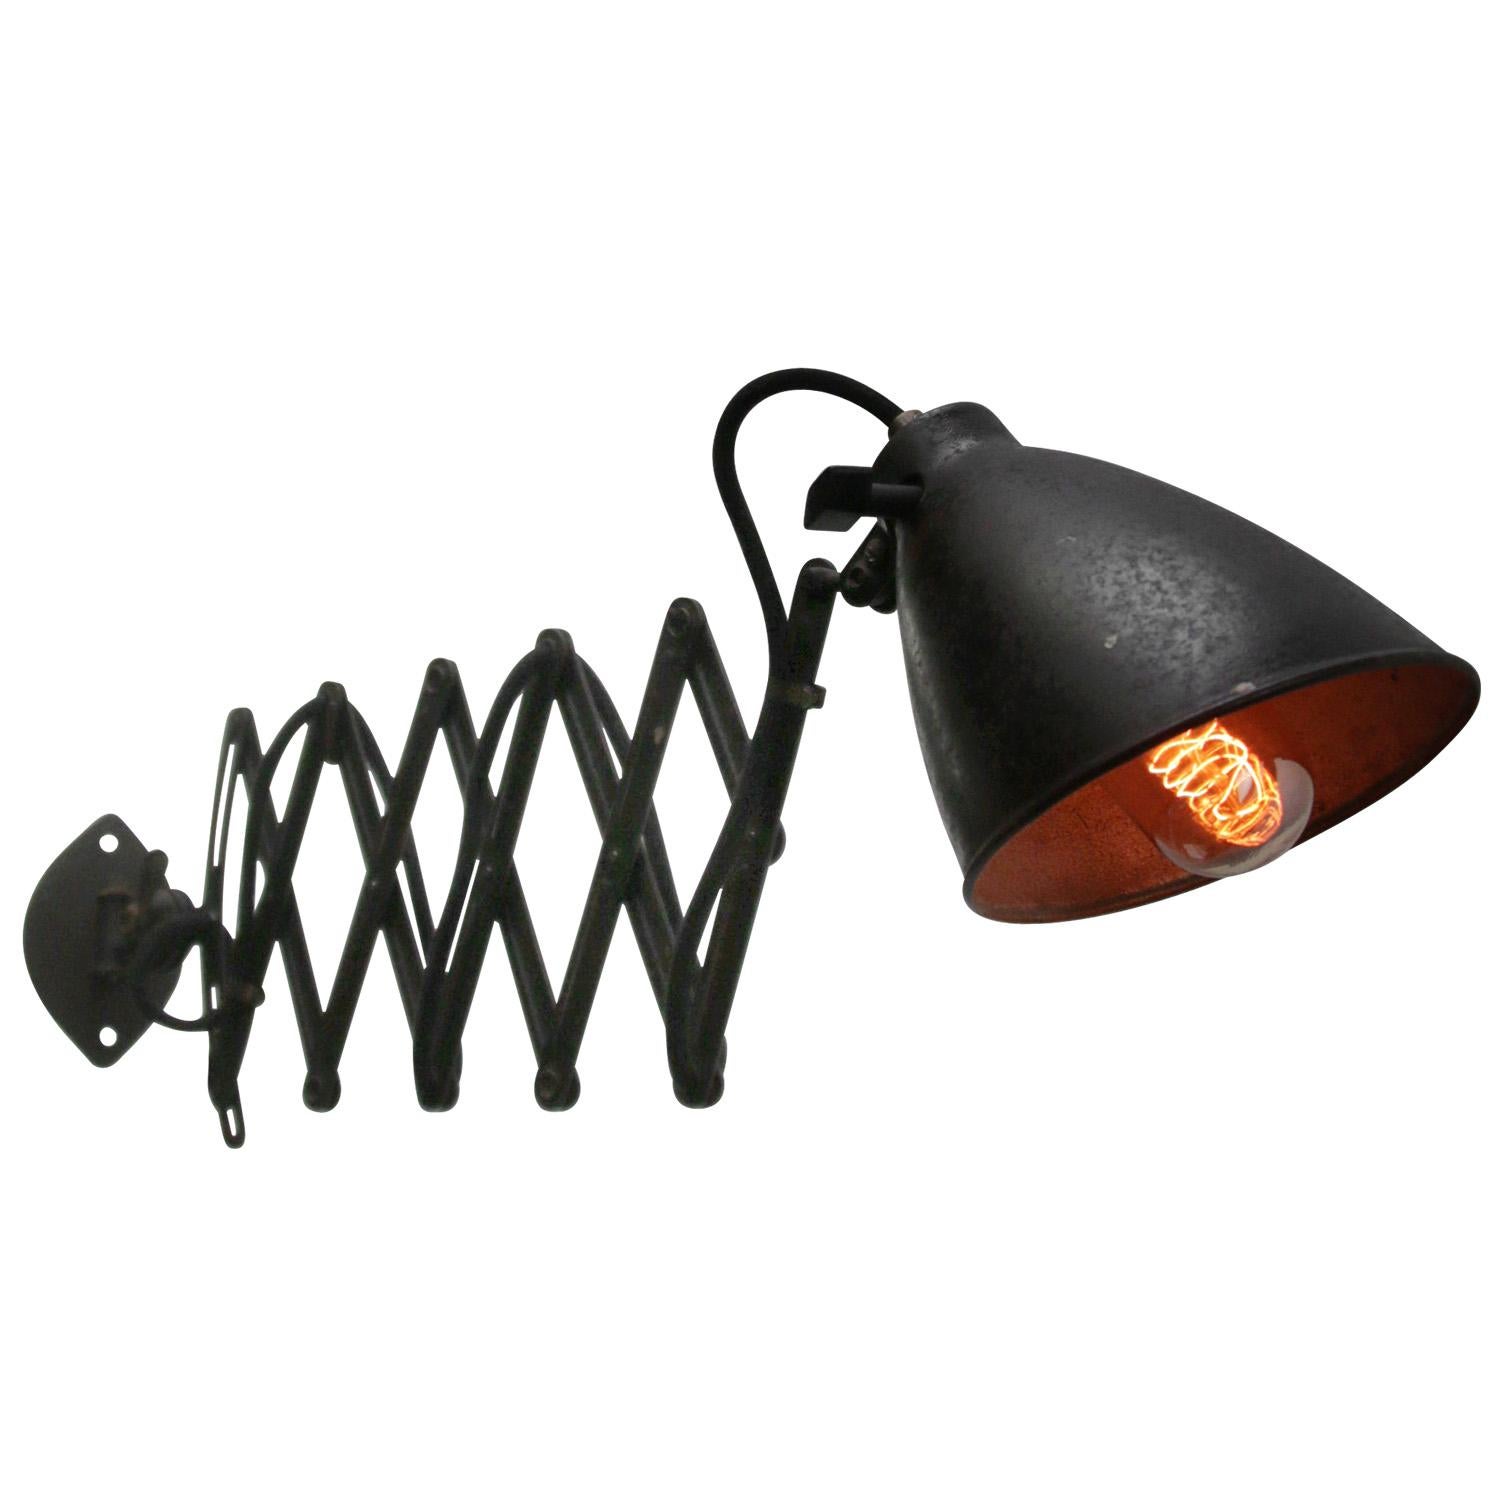 SIS scissor wall lamp
Black (old repaint) metal scissor or shade and silver interior adjustable length and horizontally and vertically swiveling arm

Shade size: Diameter 16 cm
90° angle adjustable shade

1920s iron single scissor wall